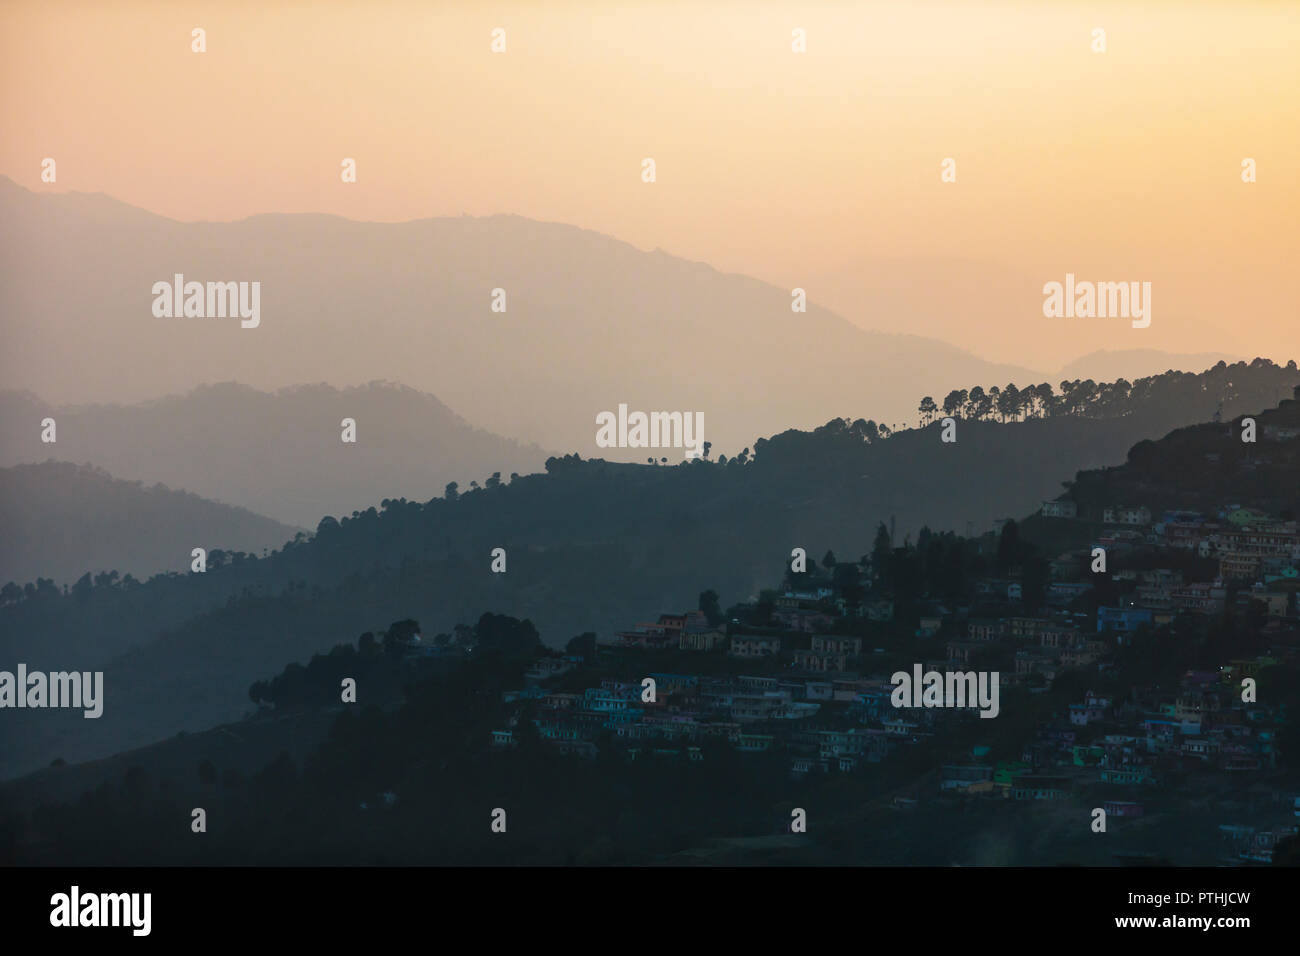 Scenic view idyllic silhouetted foothills at sunset, Supi Bageshwar, Uttarakhand, Indian Himalayan Foothills Stock Photo